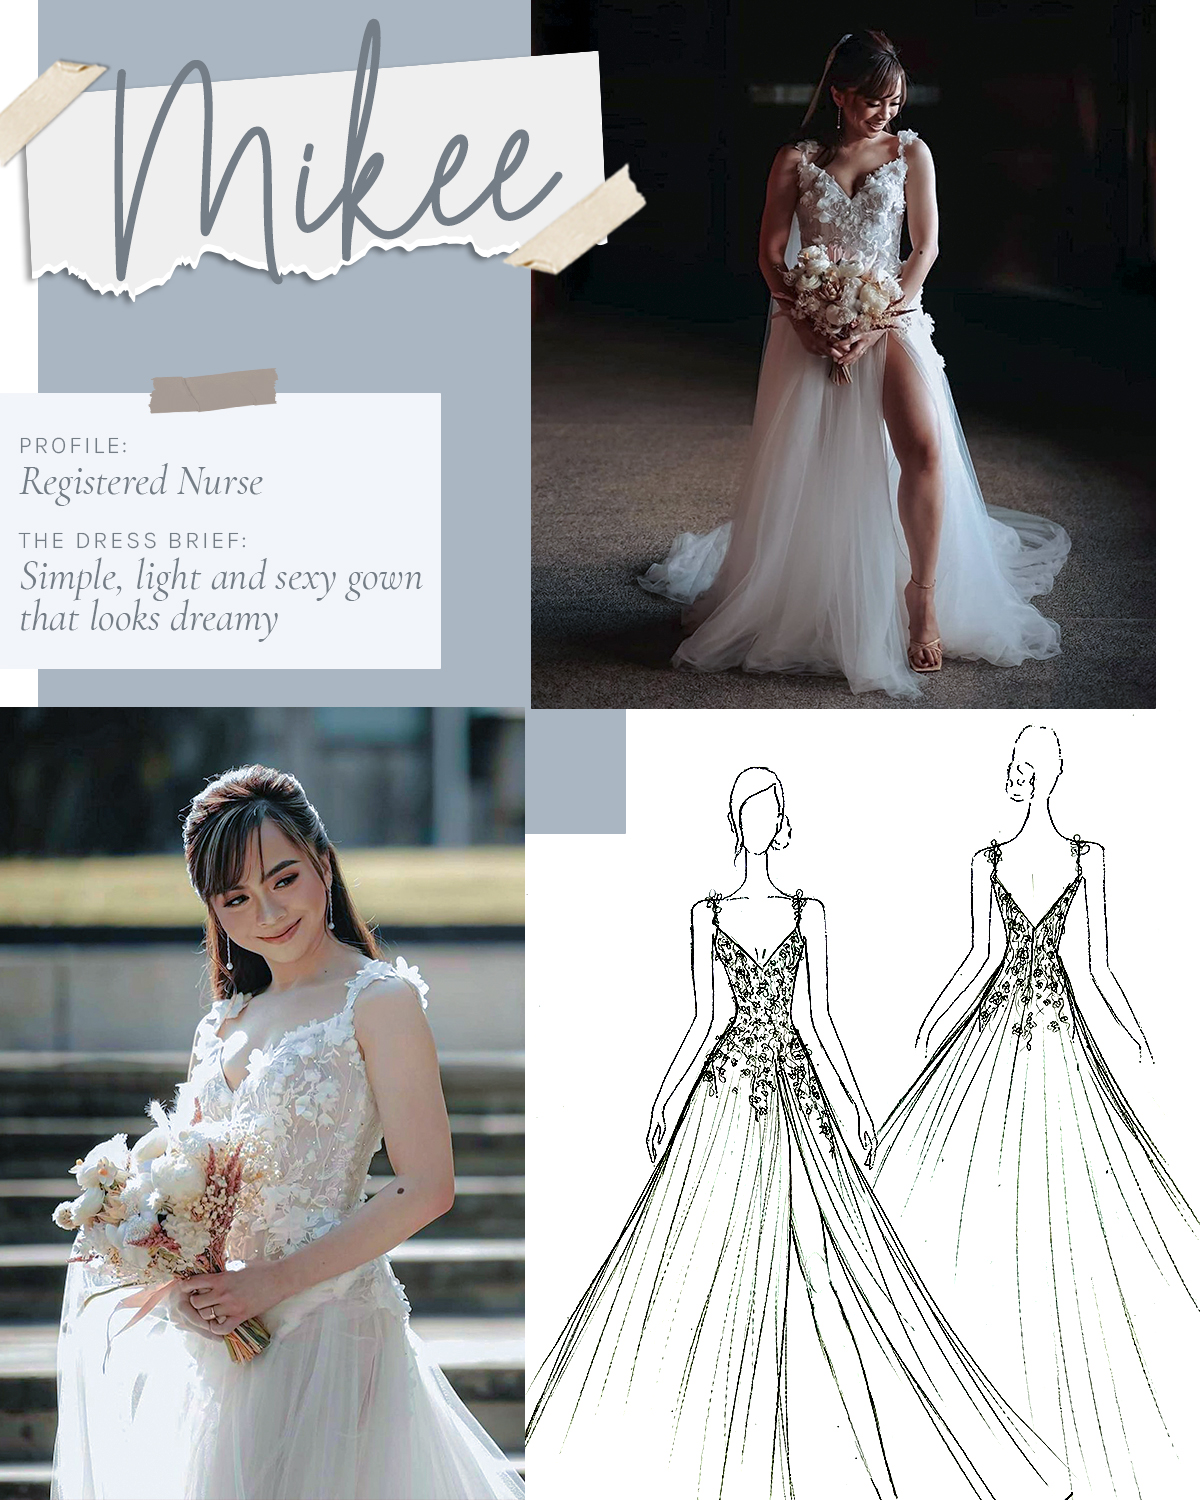 Bride: Mikee  Profile: Registered Nurse The Dress Brief: Simple, light and sexy gown that looks dreamy